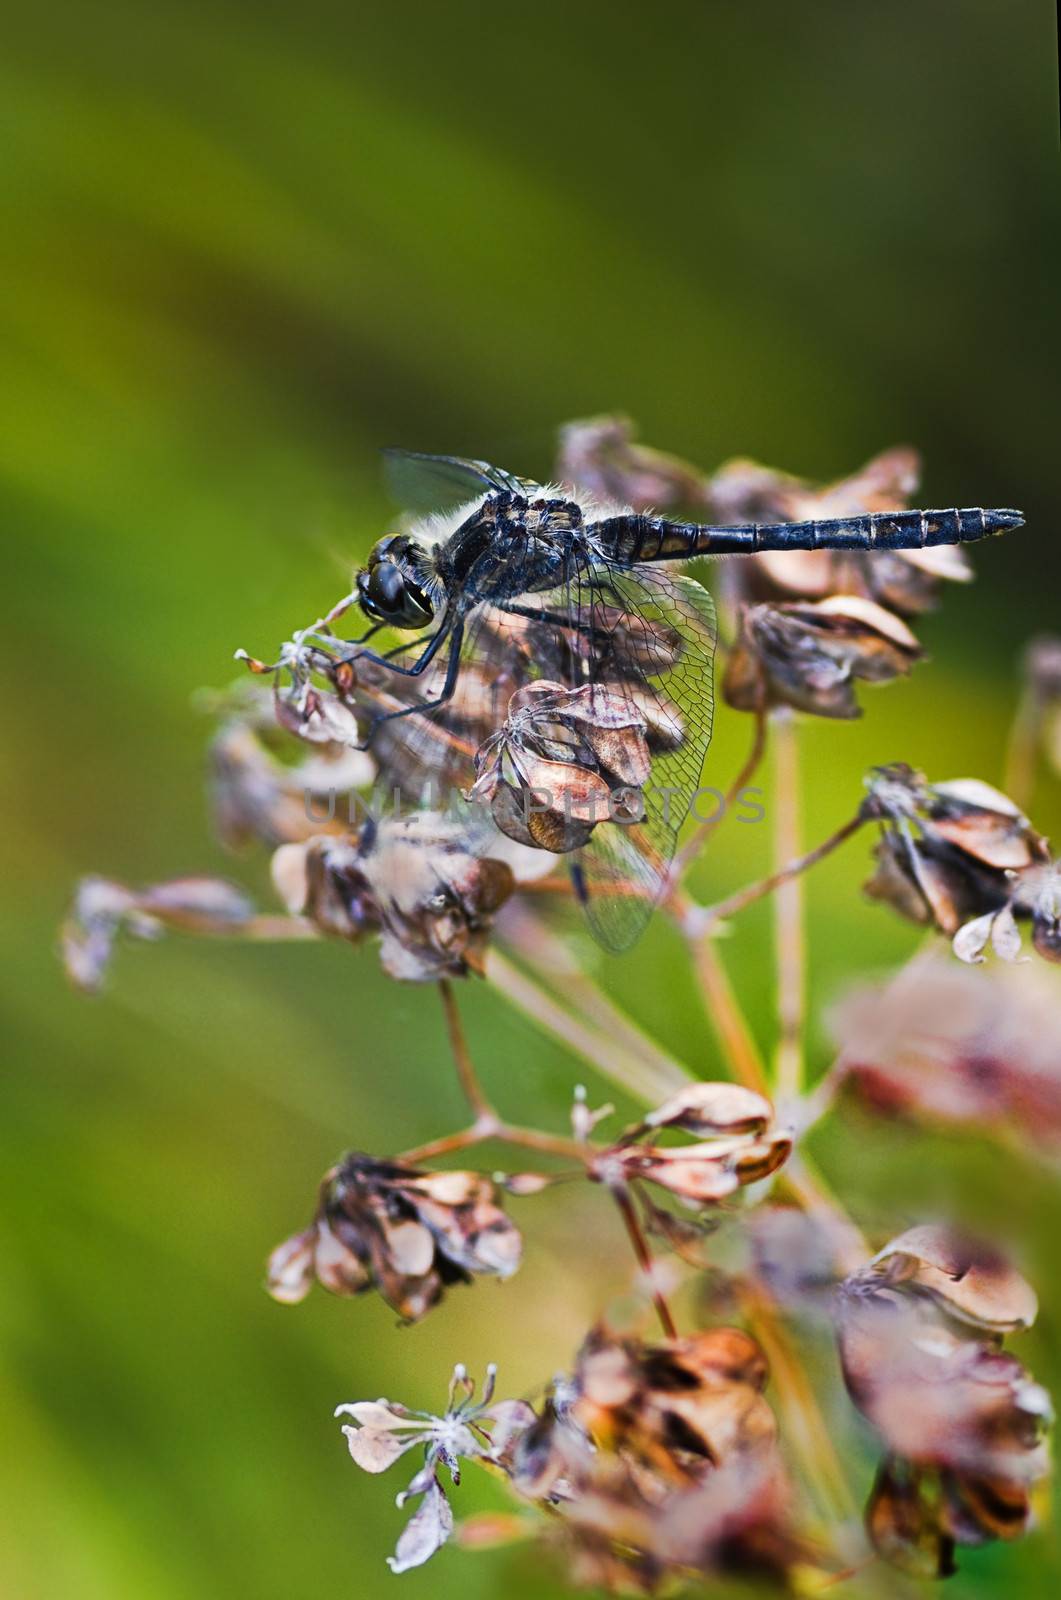 Camouflage Black Darter dragonfly by Colette